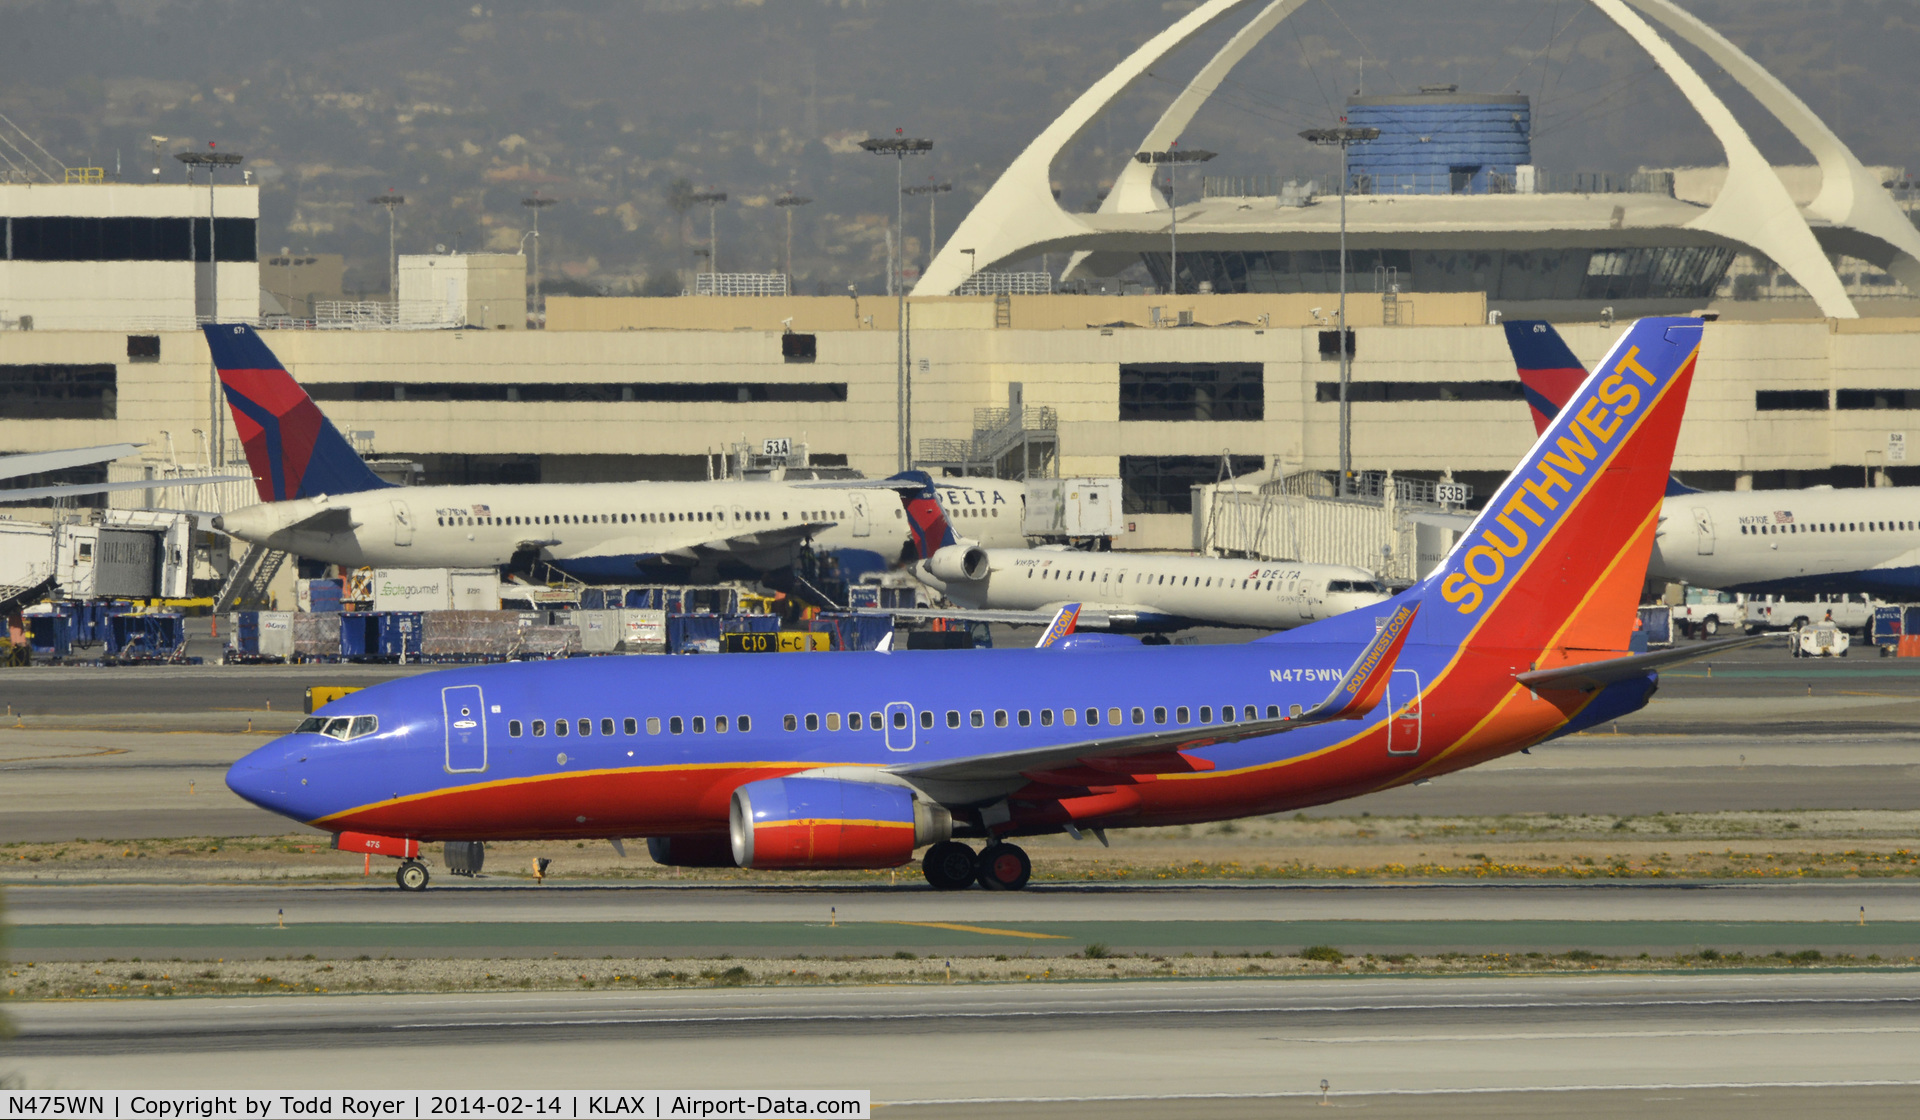 N475WN, 2004 Boeing 737-7H4 C/N 32474, Taxiing to gate at LAX